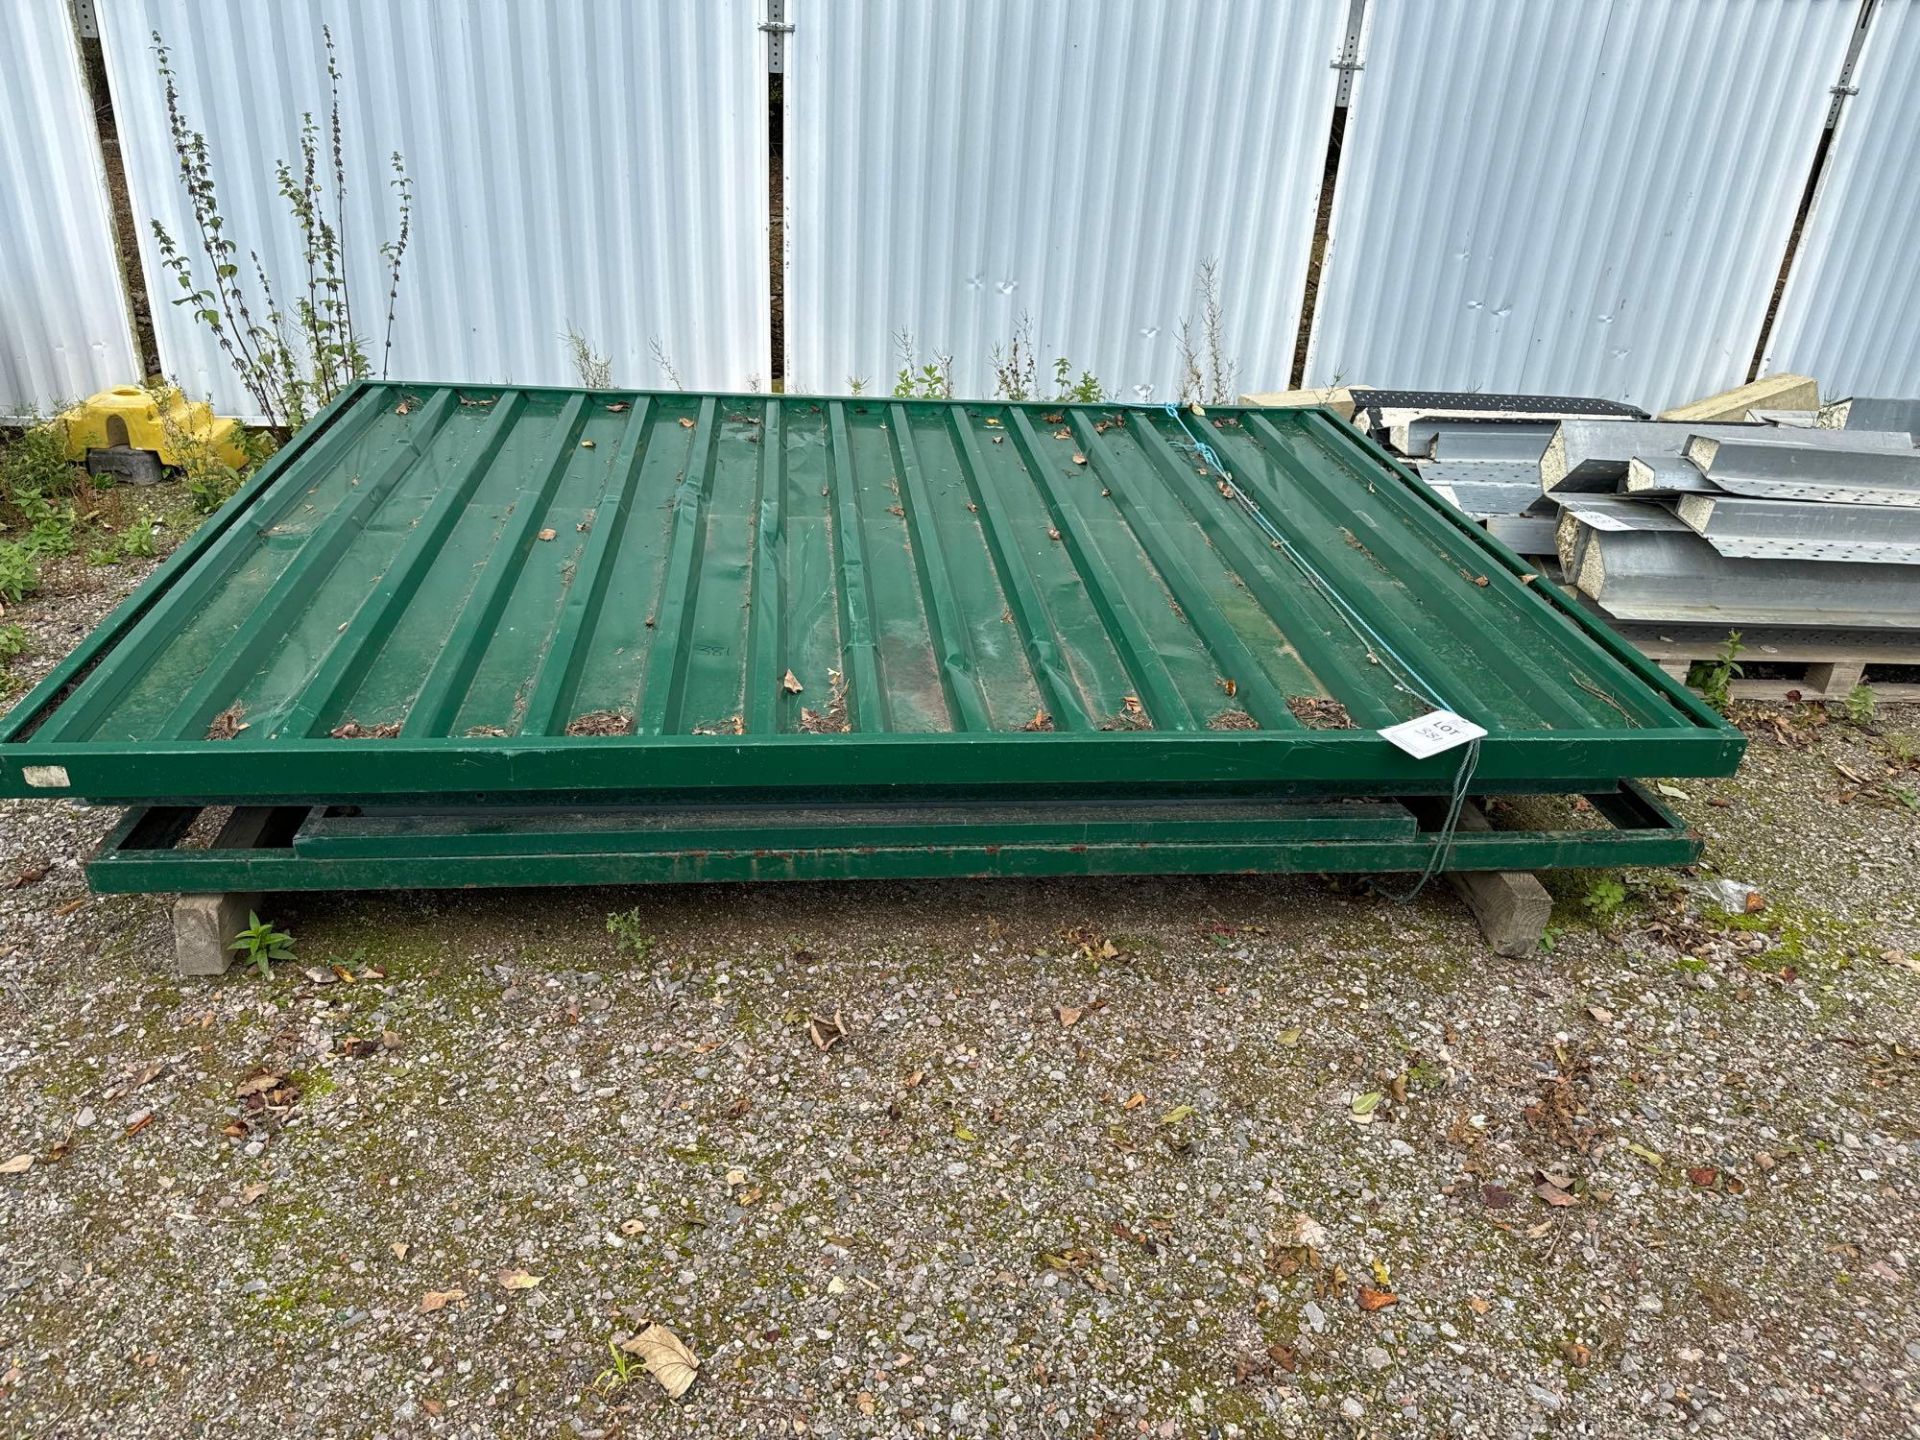 Portable Space Collapsible green metal shed (2018) s/n G3-067